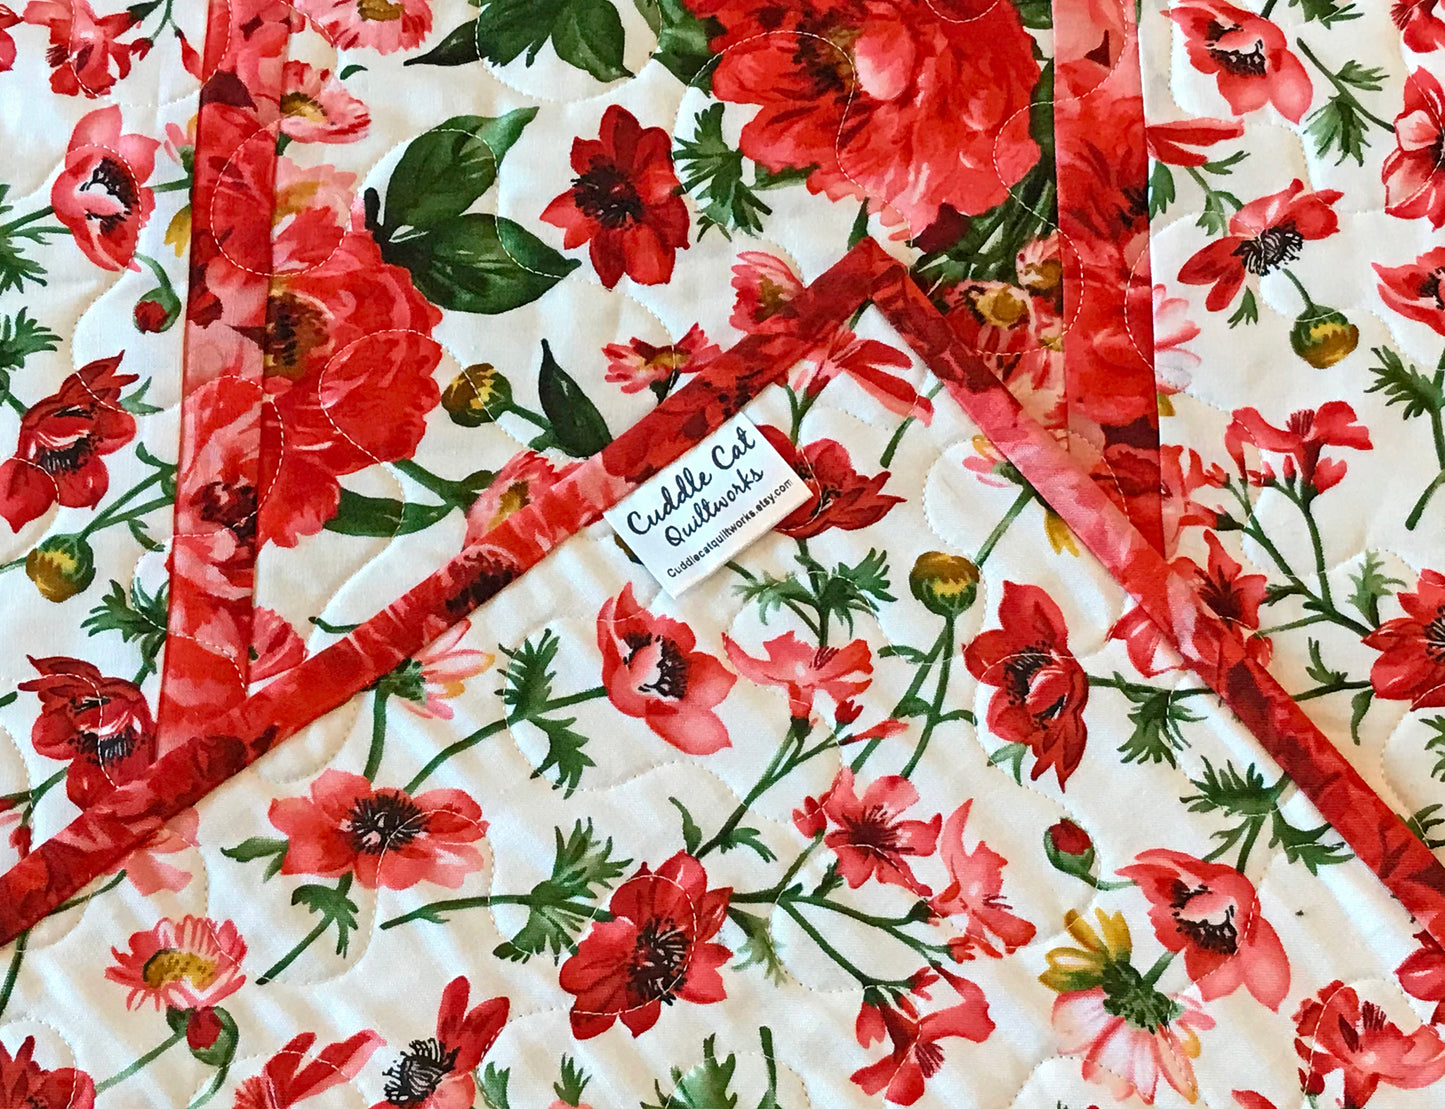 Red and White Roses Table Runner - Handmade Quilts, Digital Patterns, and Home Décor items online - Cuddle Cat Quiltworks